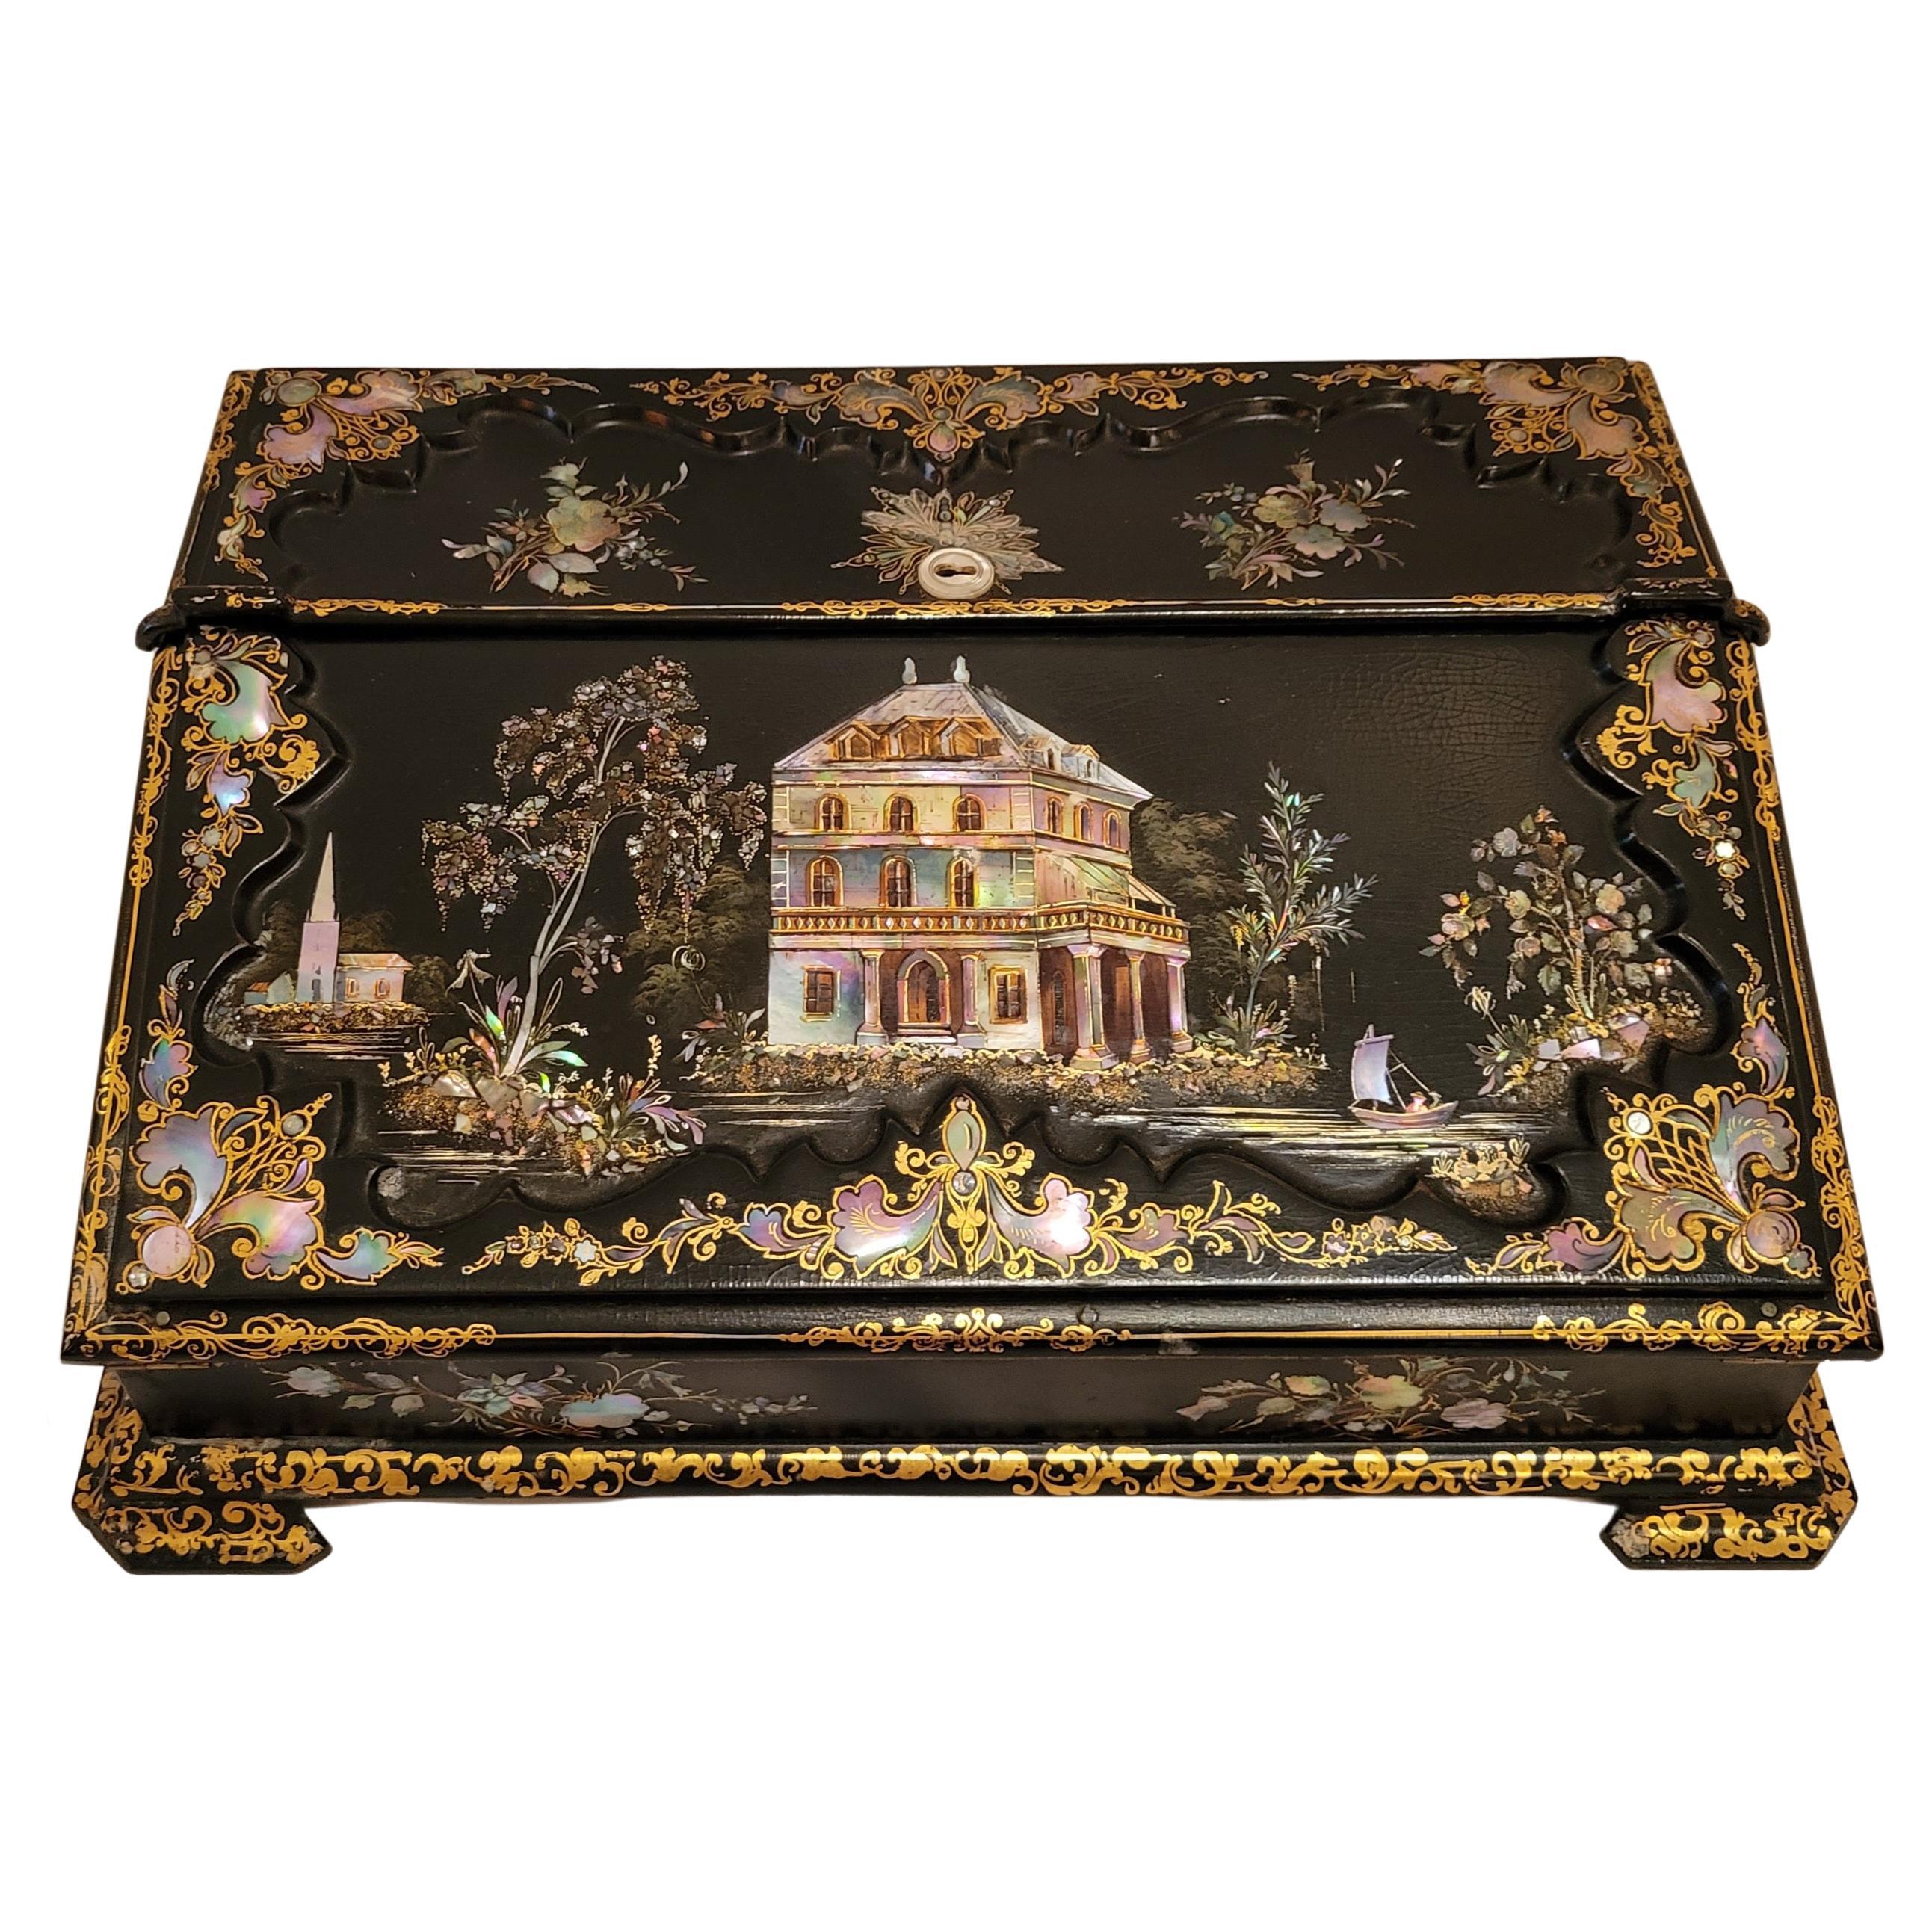 Antique English Exceptional Lacquer Mother-of-Pearl Travel Desk, circa 1860-1870 For Sale